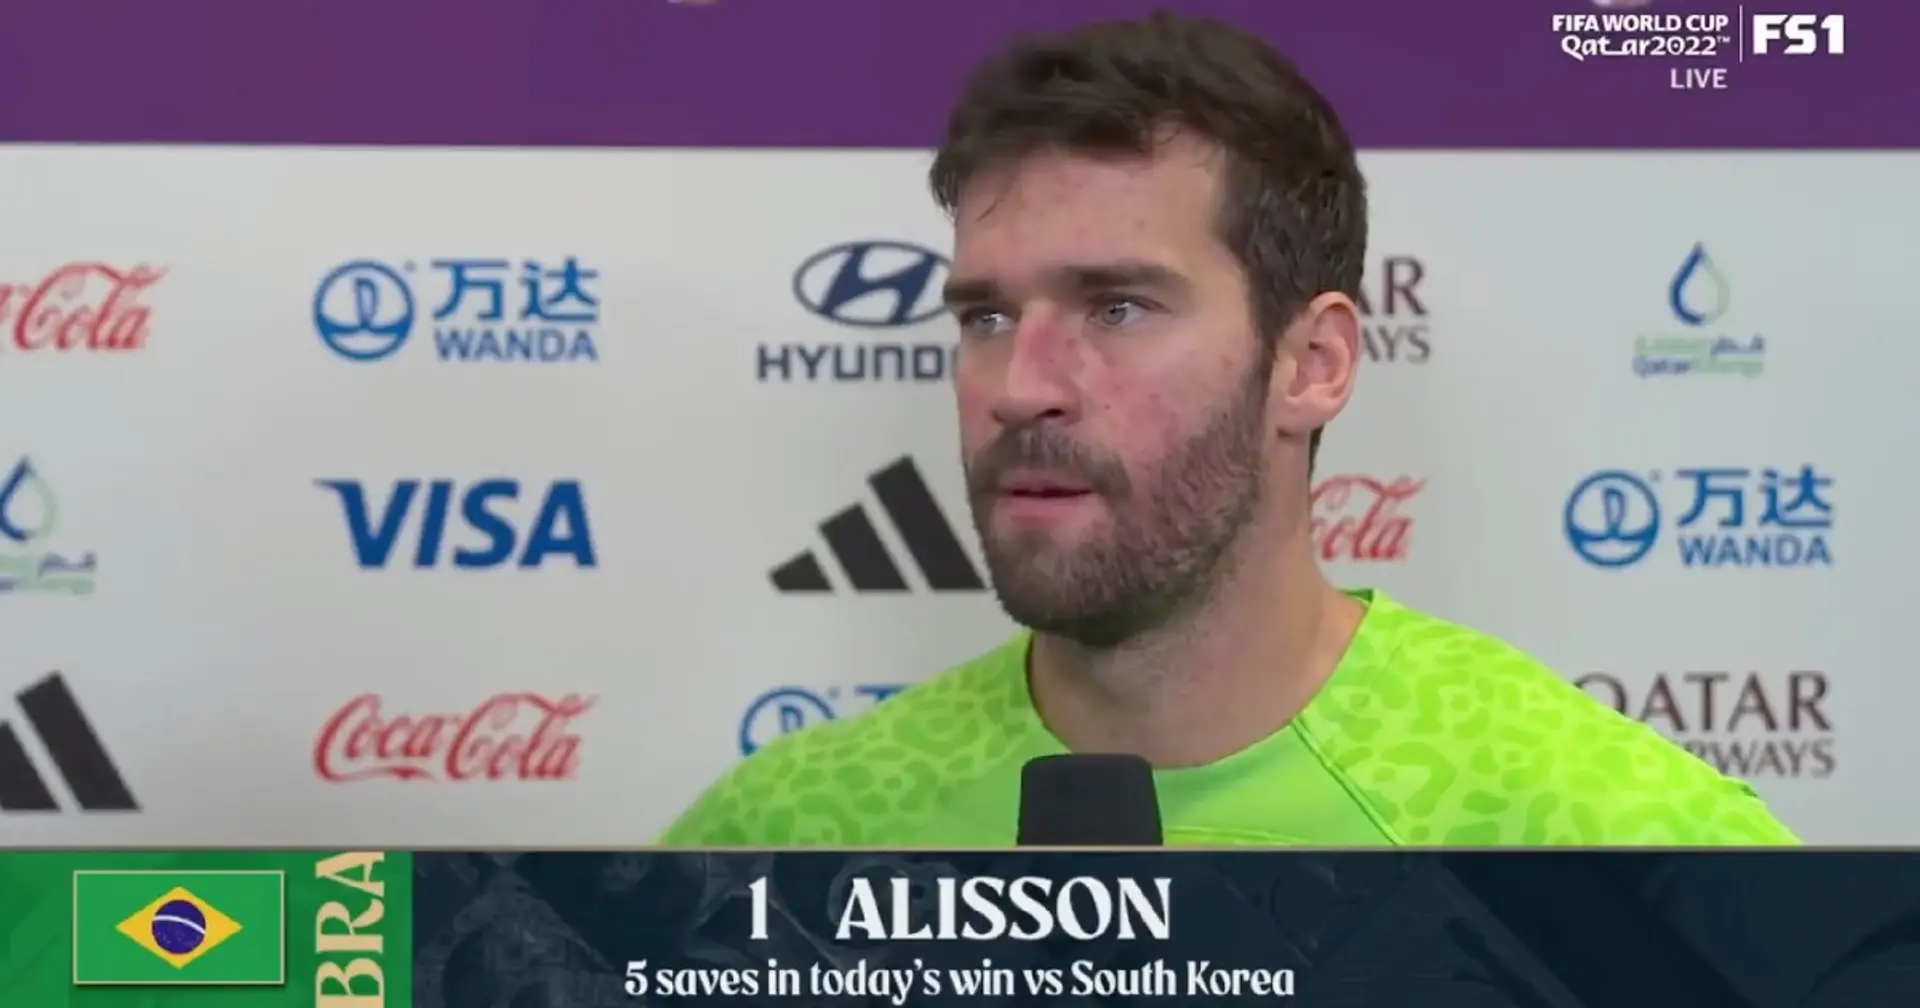 Alisson in World Cup quarter finals and 2 more big stories you might have missed